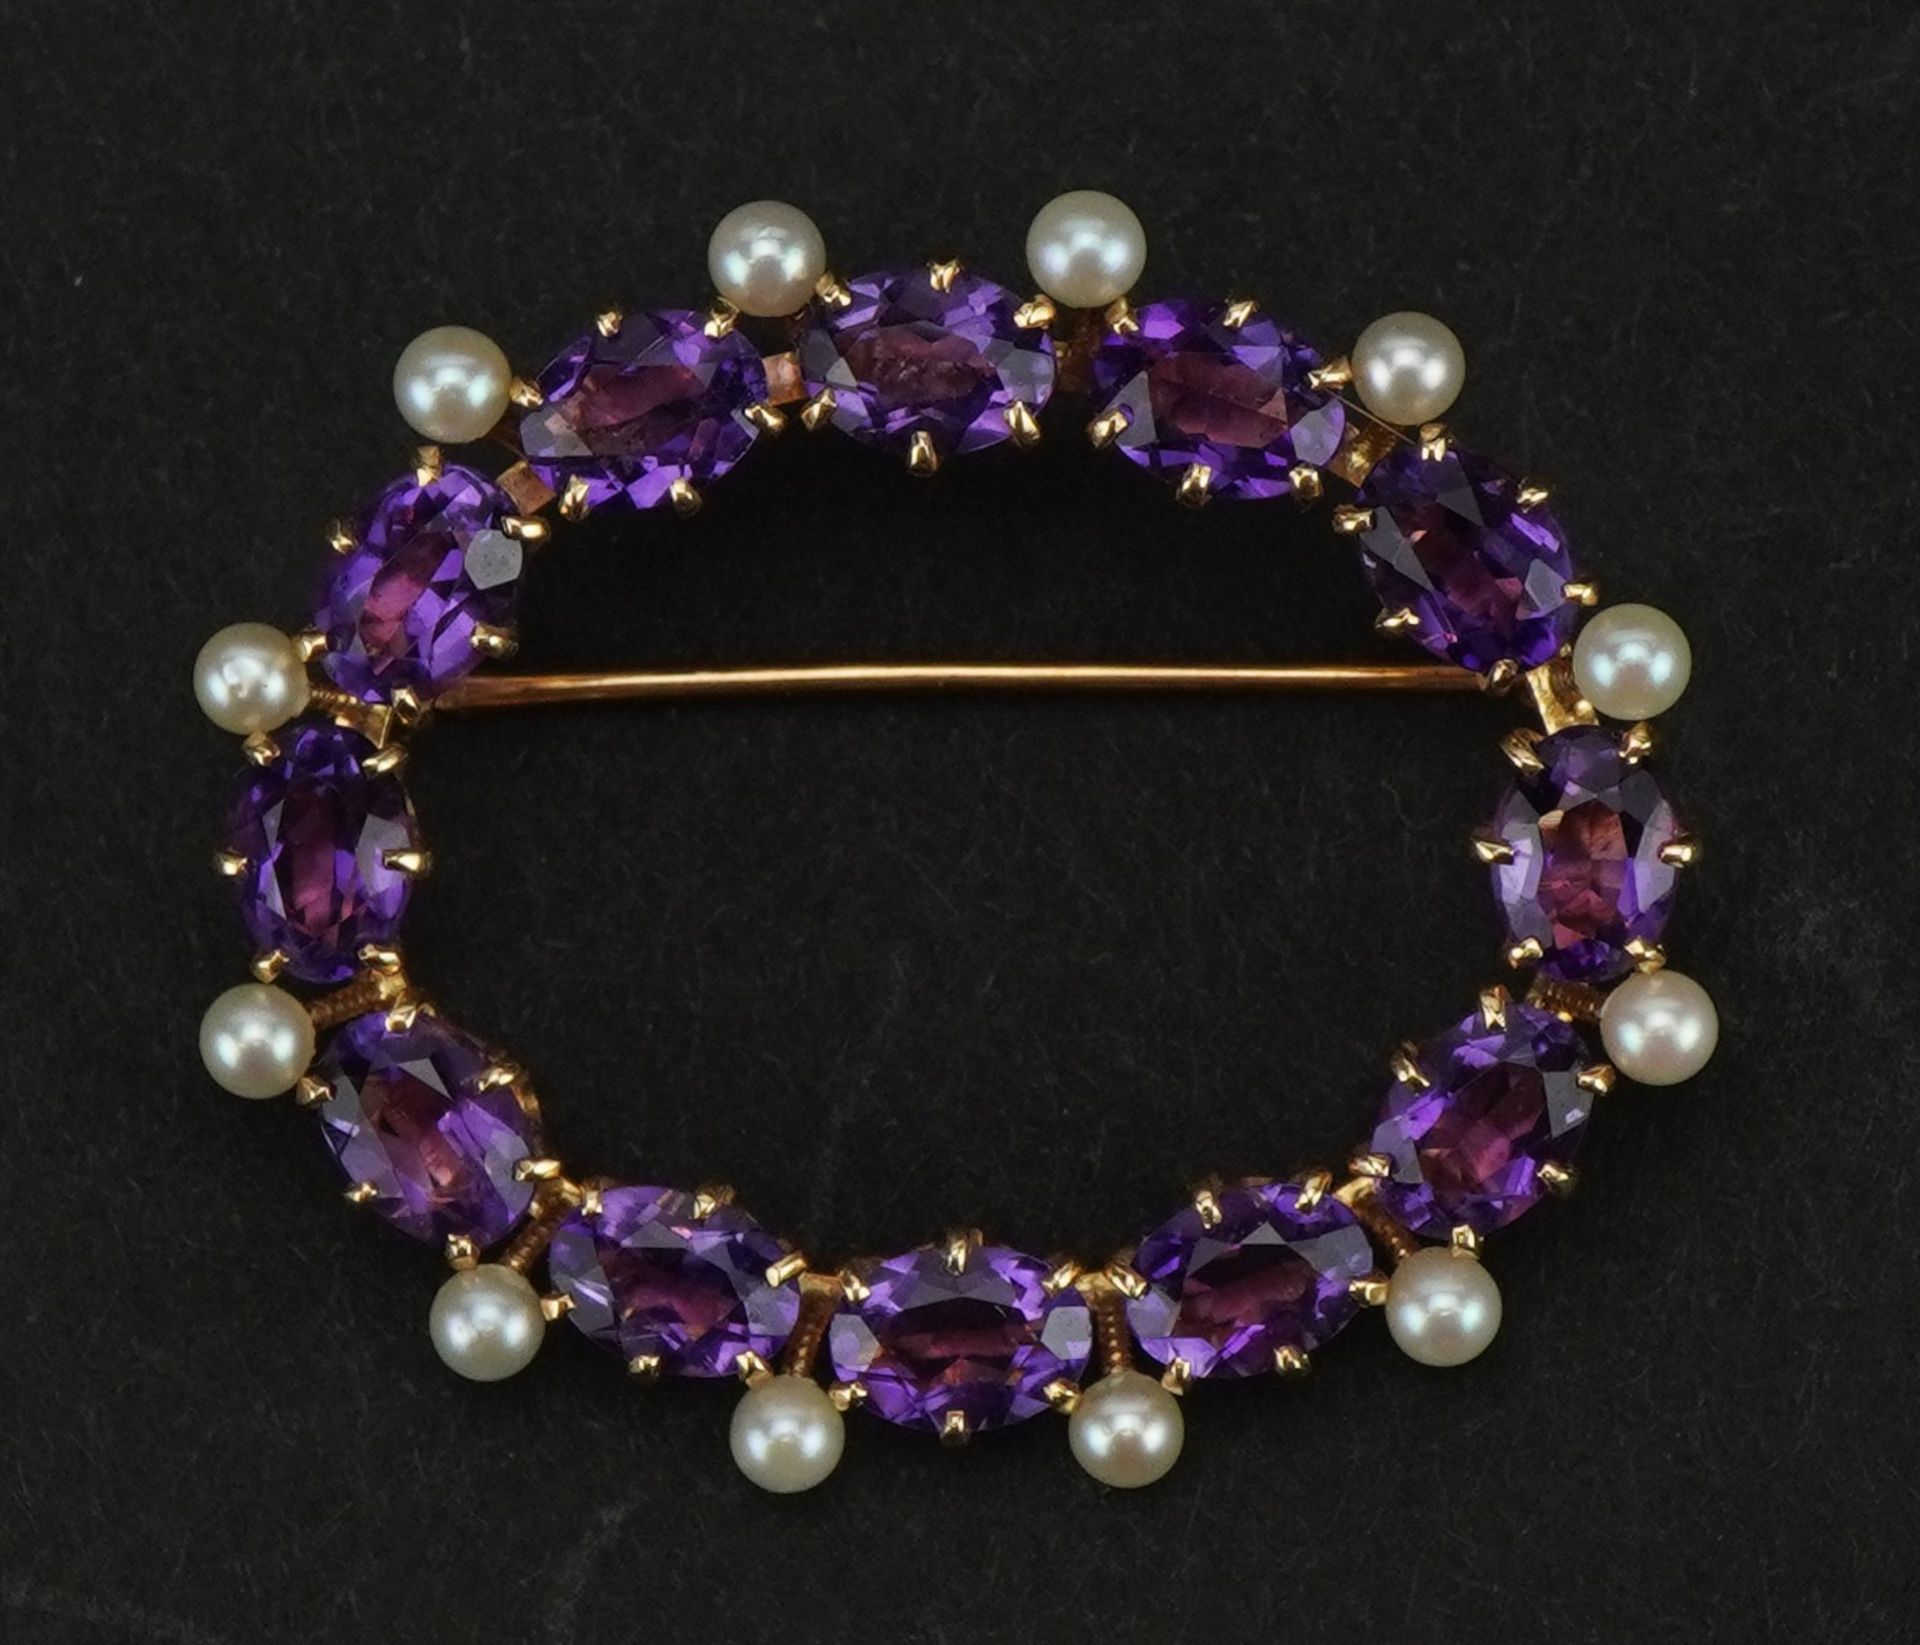 14k gold amethyst and seed pearl oval brooch, 4.0cm wide, 8.1g : For further information on this lot